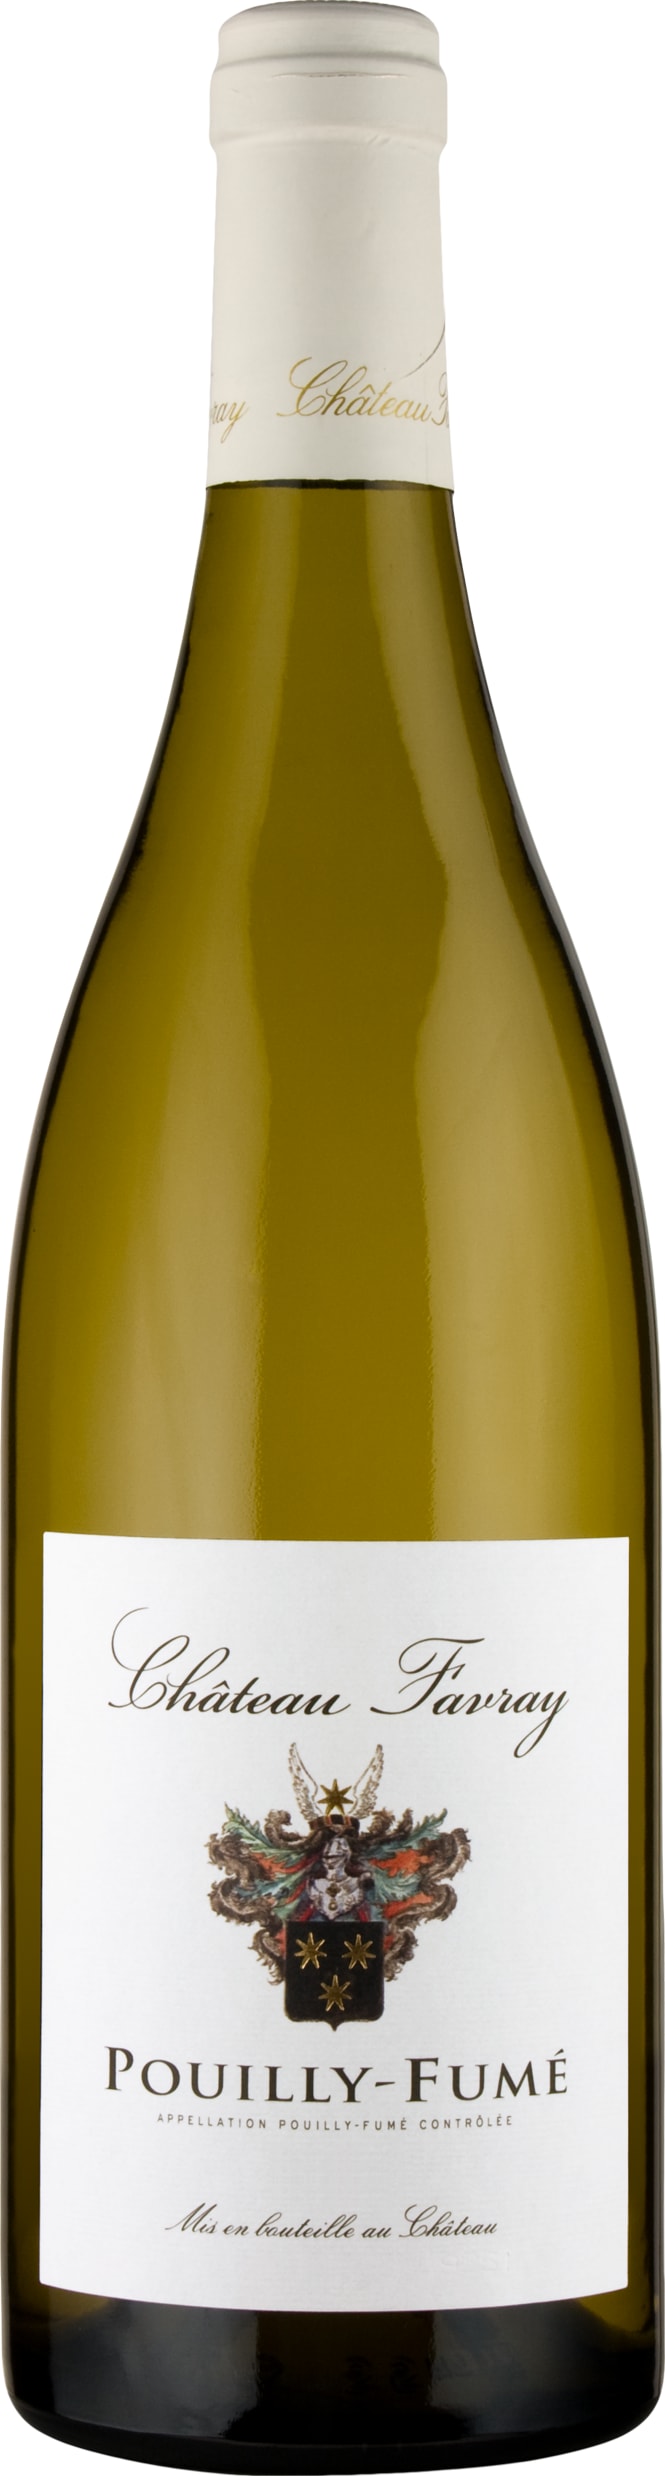 Chateau Favray Pouilly Fume 2022 75cl - Buy Chateau Favray Wines from GREAT WINES DIRECT wine shop